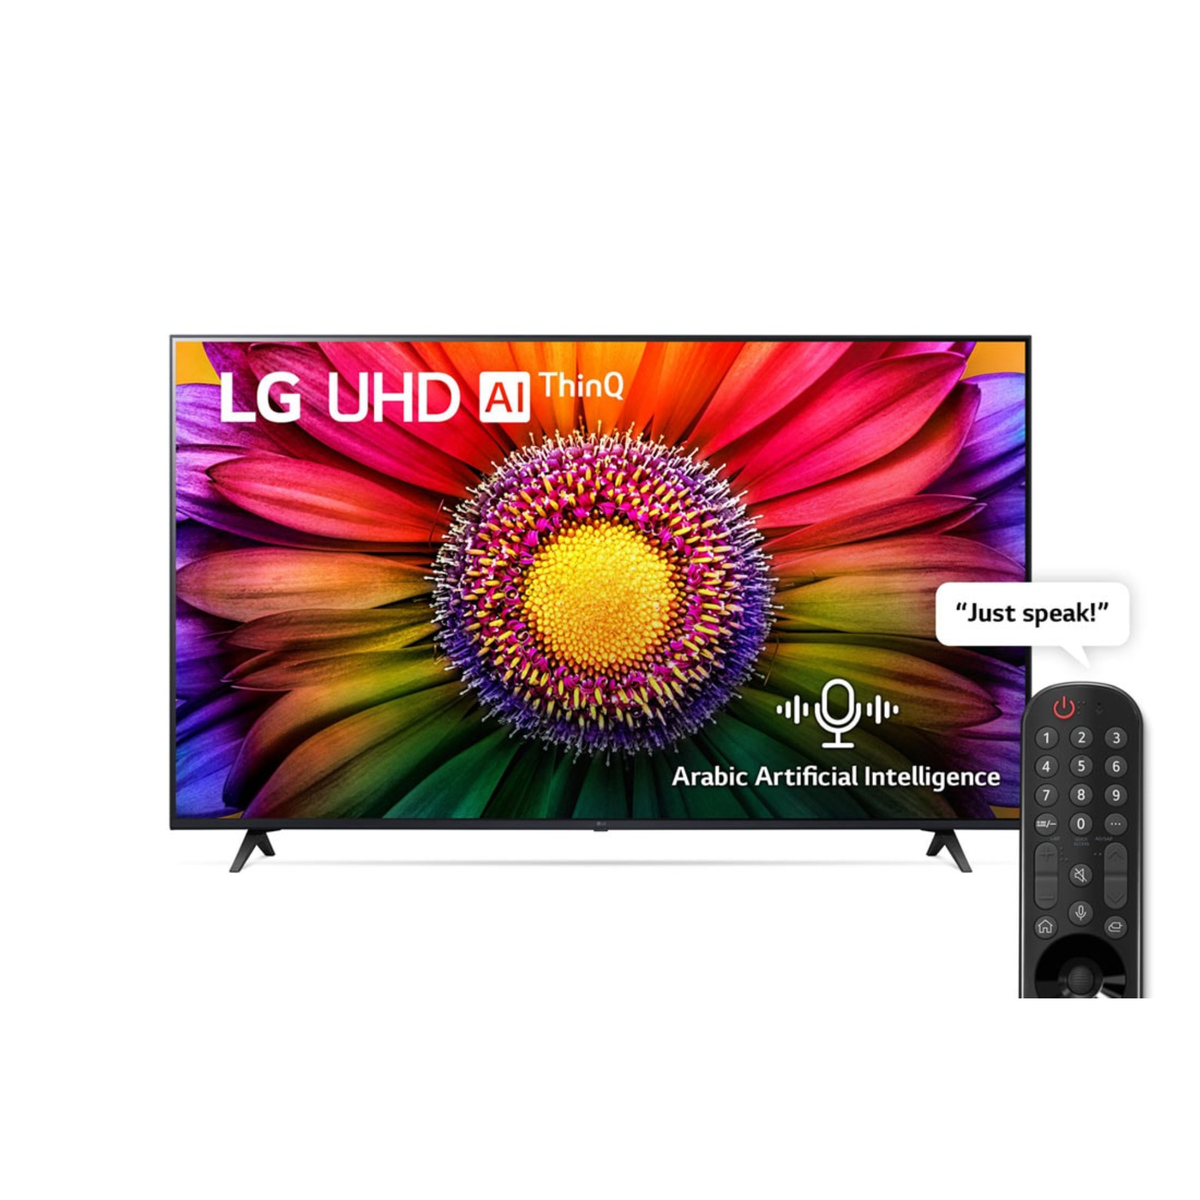 LG 55 Inches 4K Smart UHD TV with Magic remote, HDR, WebOS, 55UR80006LJ